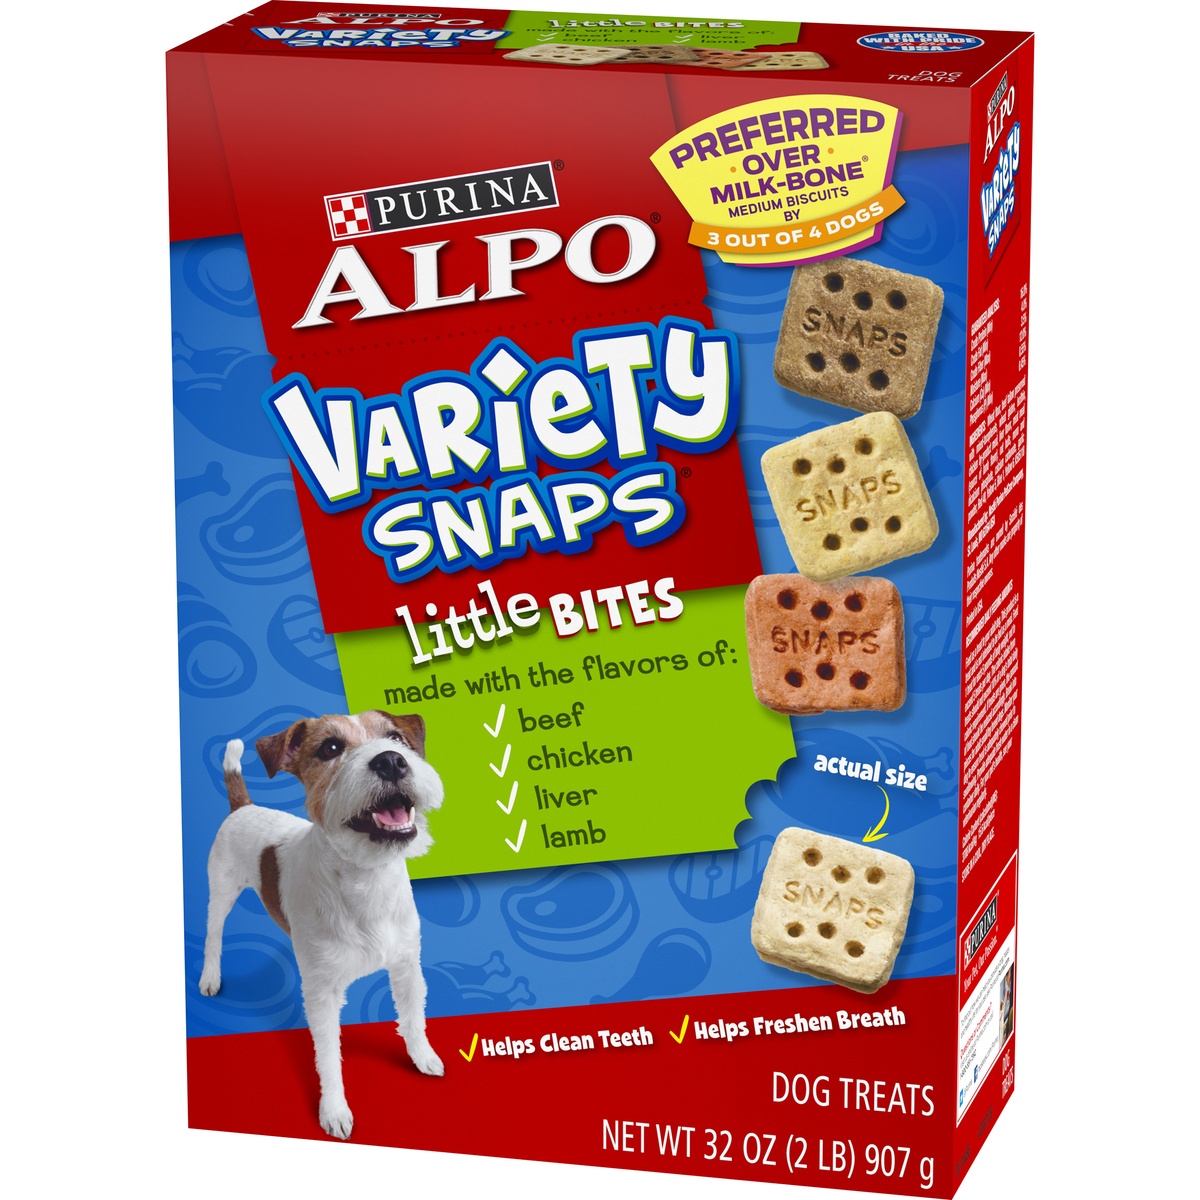 slide 3 of 11, Purina ALPO Variety Snaps Little Bites Dog Treats with Beef, Chicken, Liver & Lamb Flavors, 32 oz